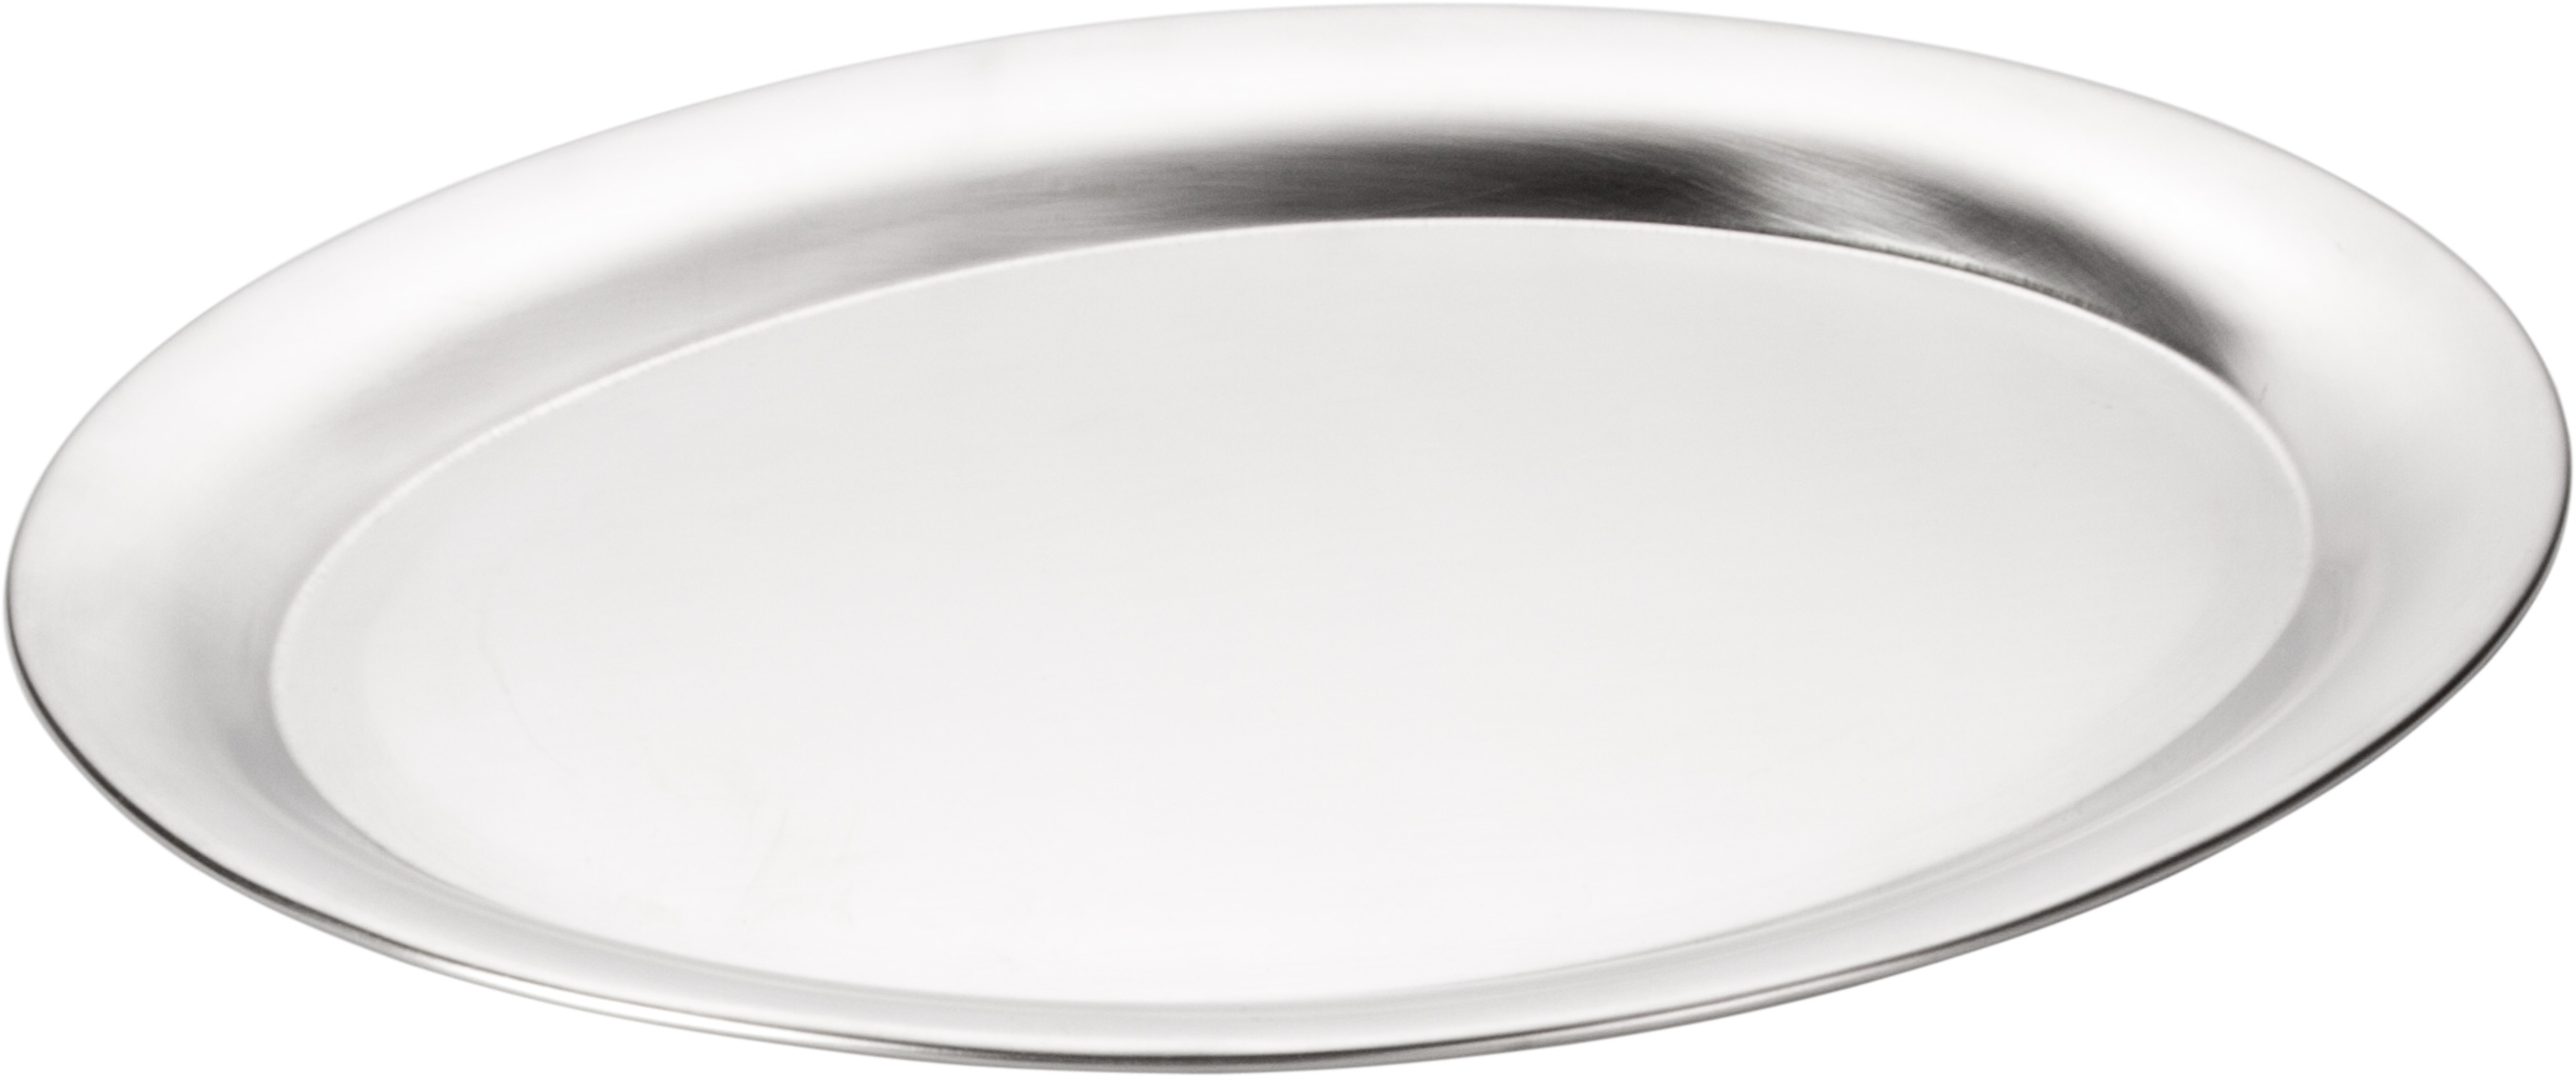 Serving tray oval, stainless steel mat - 26,5x19cm